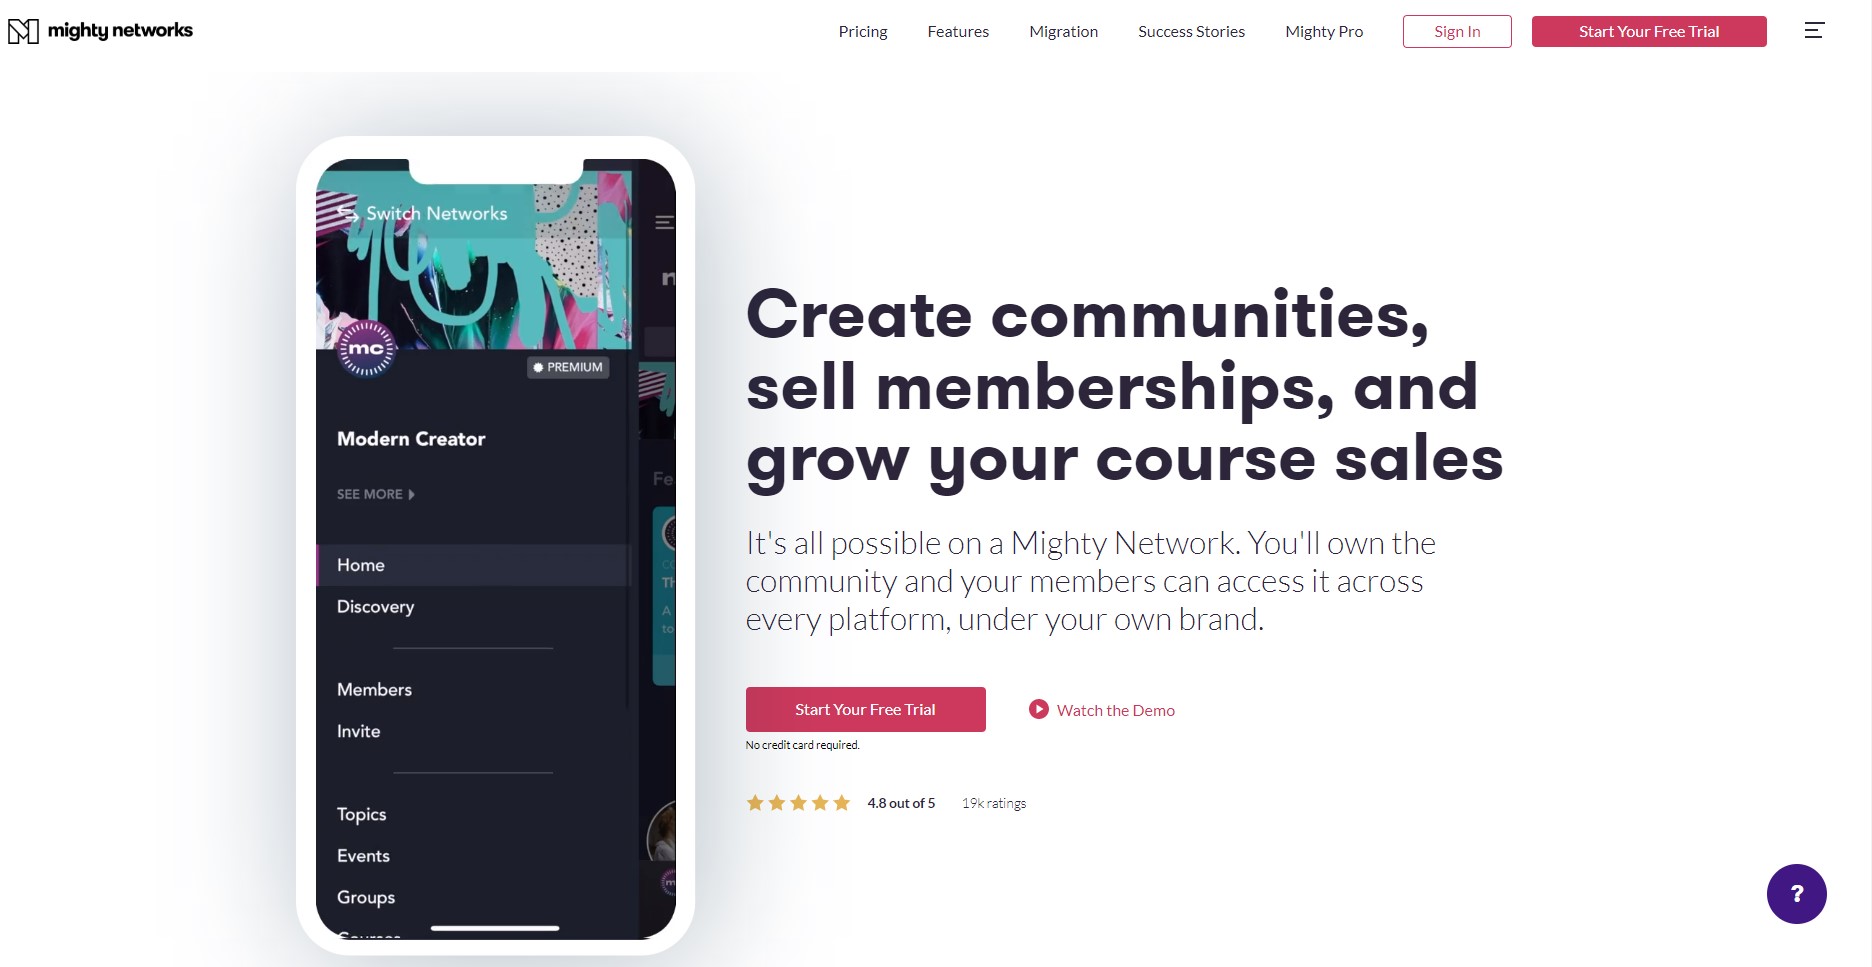 Mighty Networks is an online course platform that powers brands and businesses, allowing them to sell online courses, paid memberships, events, content, and community, all under their brand, instantly available natively on all platforms.